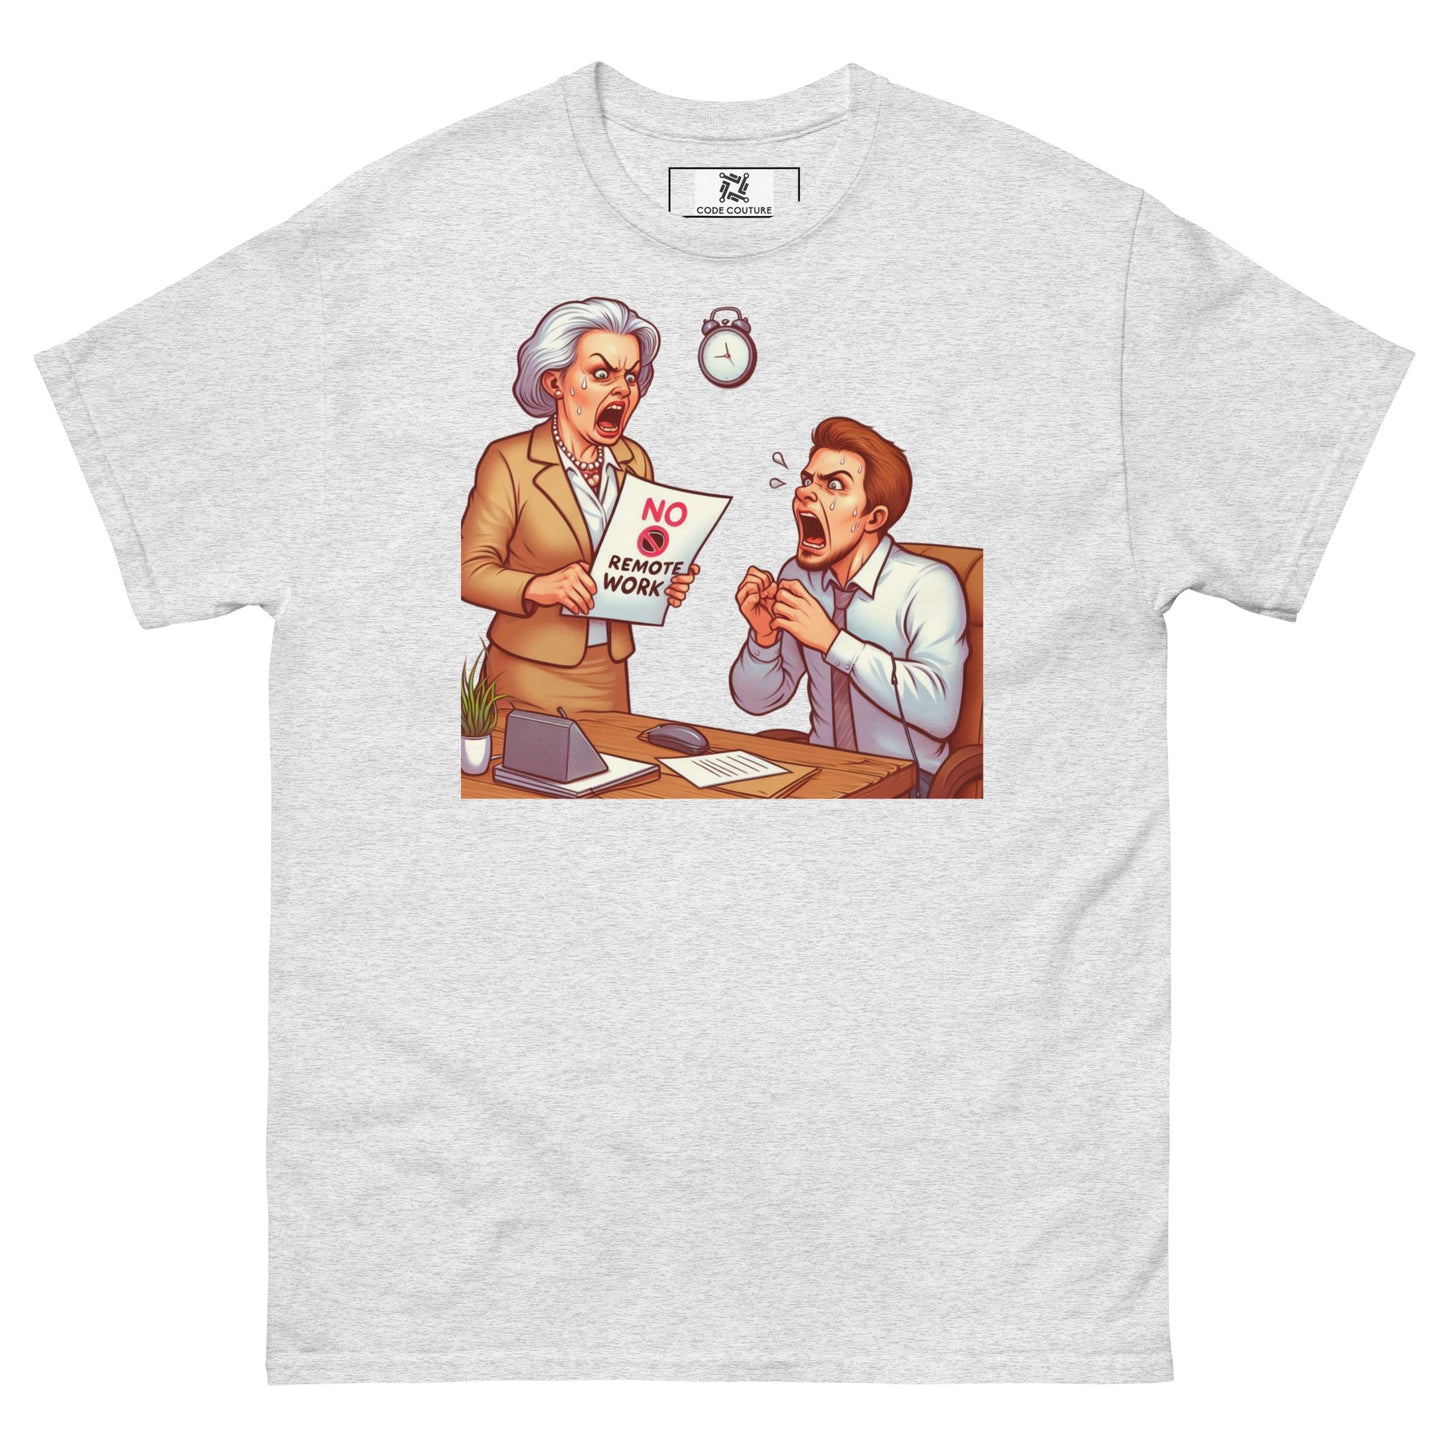 No Remote Work classic tee